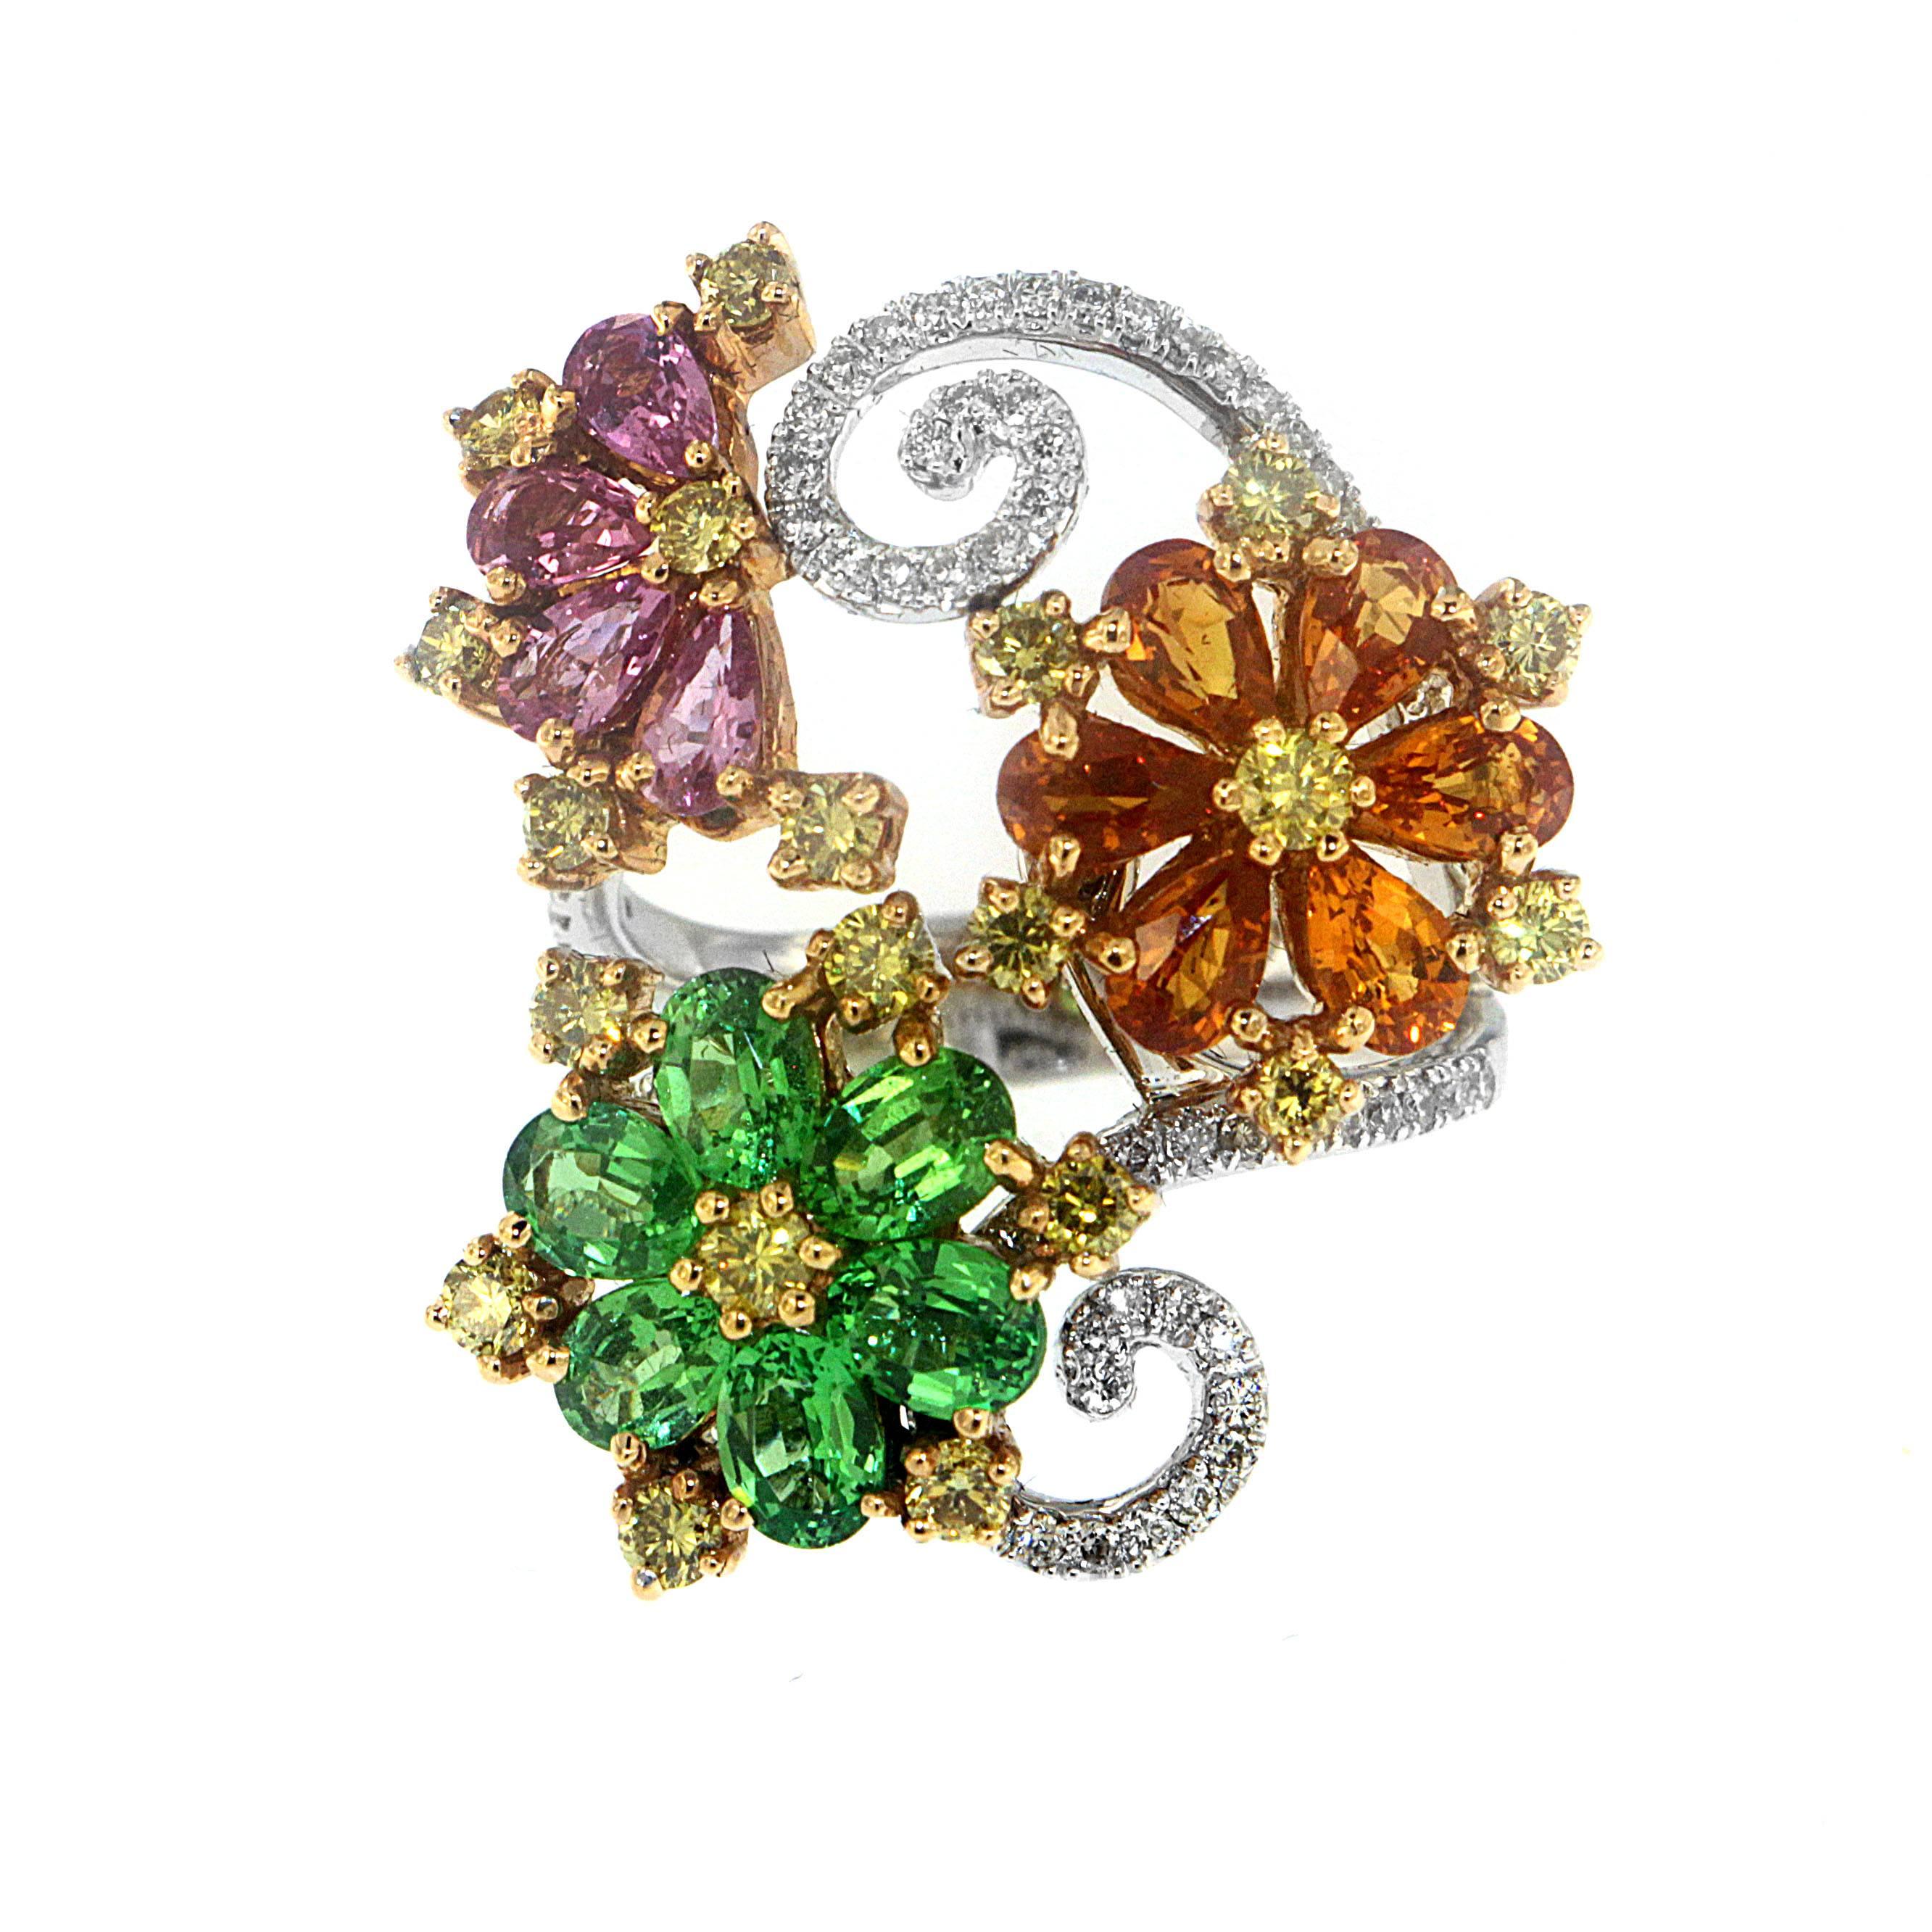 Zorab's swirling bouquet with Orange (1.84 carats) and Pink (0.90) Sapphires and Tsavorite Garnet (2.30 carats) petals is both a testament to his love of the beautiful and the aesthetic and an invitation to the enchanted world of flowers. This